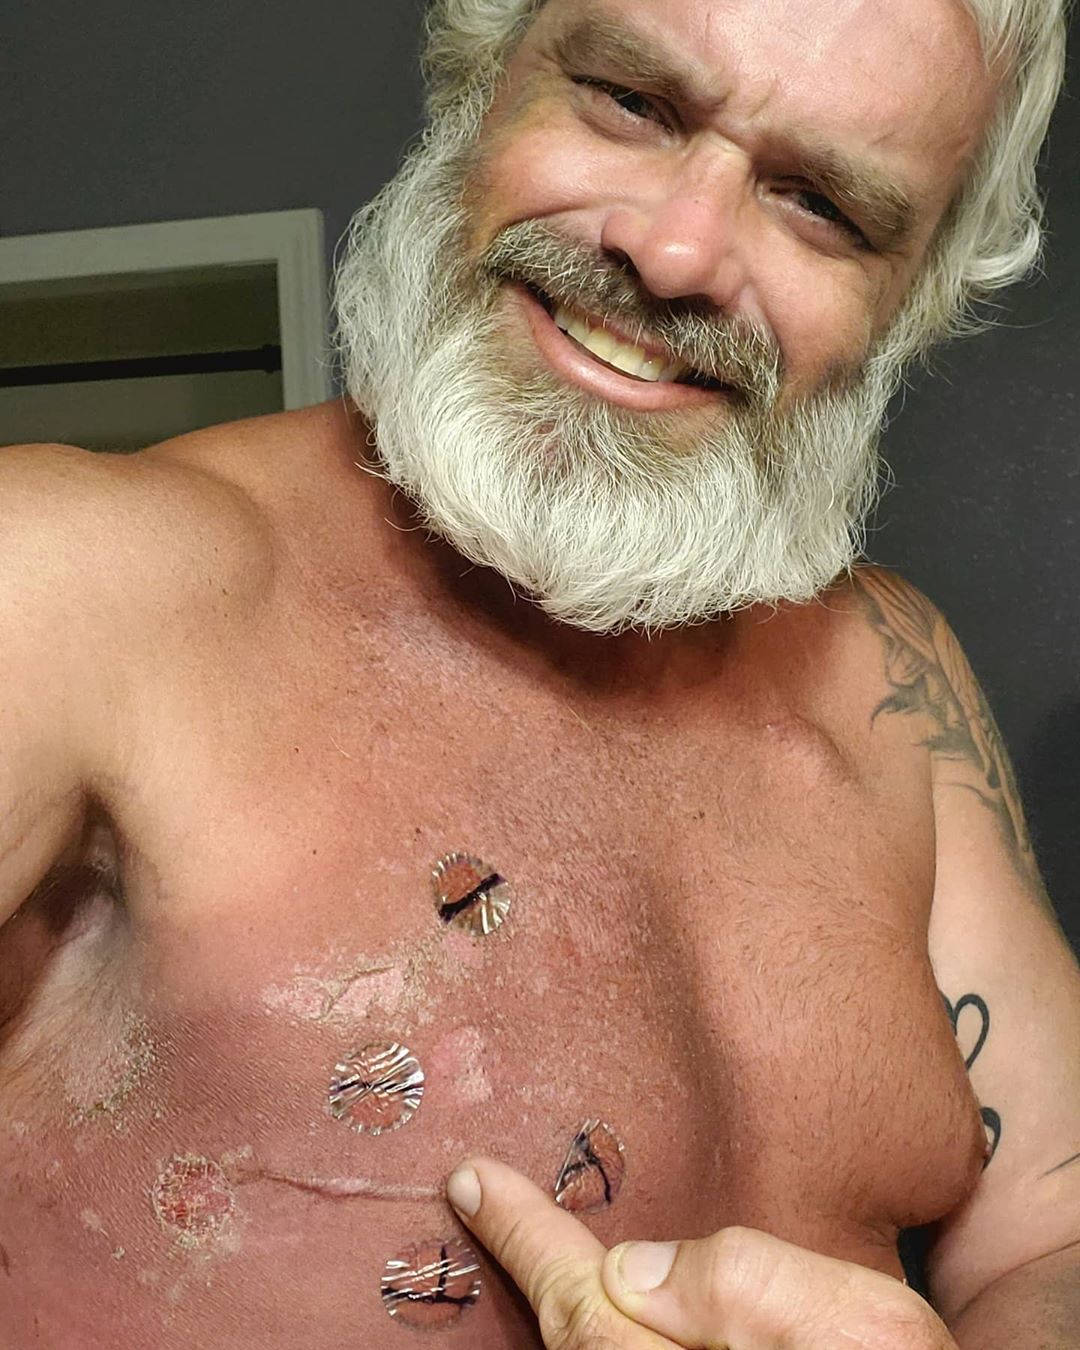 Our Warrior Wednesday spotlight, Zac Yarbrough, shows off his scars on his chest.